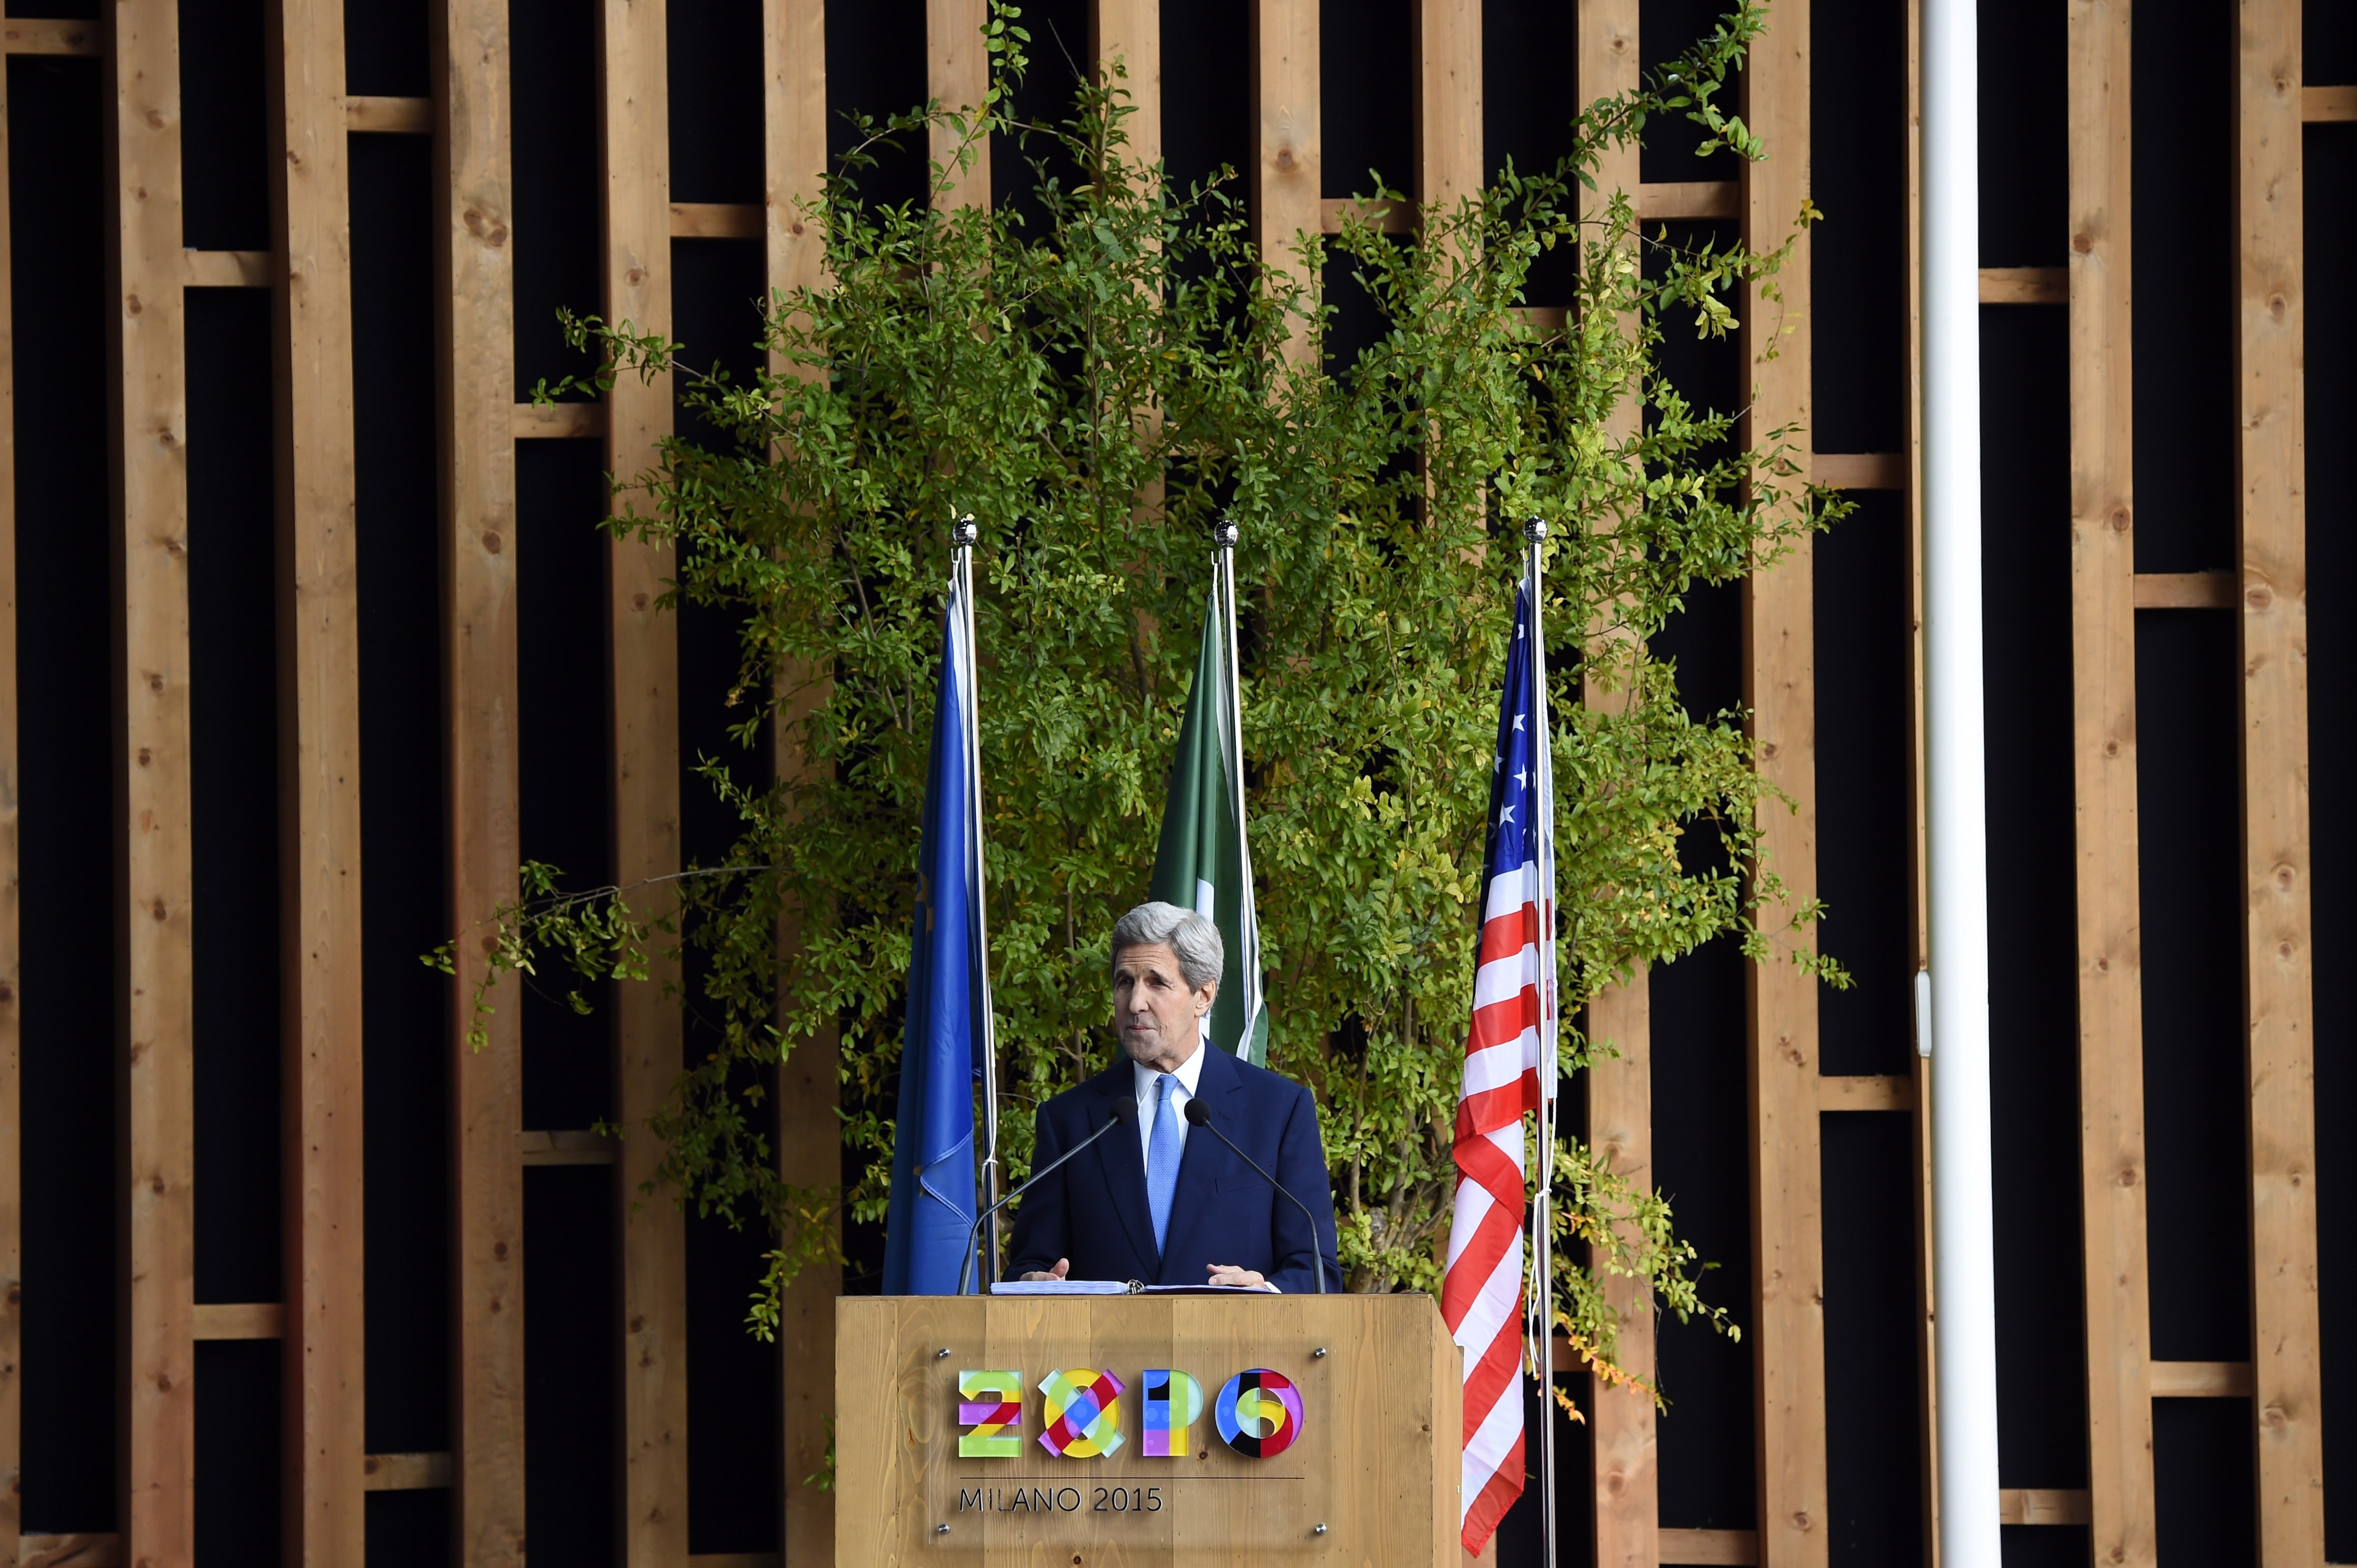 John Kerry speaks during a visit at the Universal Exhibition 2015 in Milan on Oct. 17, 2015. (Olivier Morin—AFP/Getty Images)